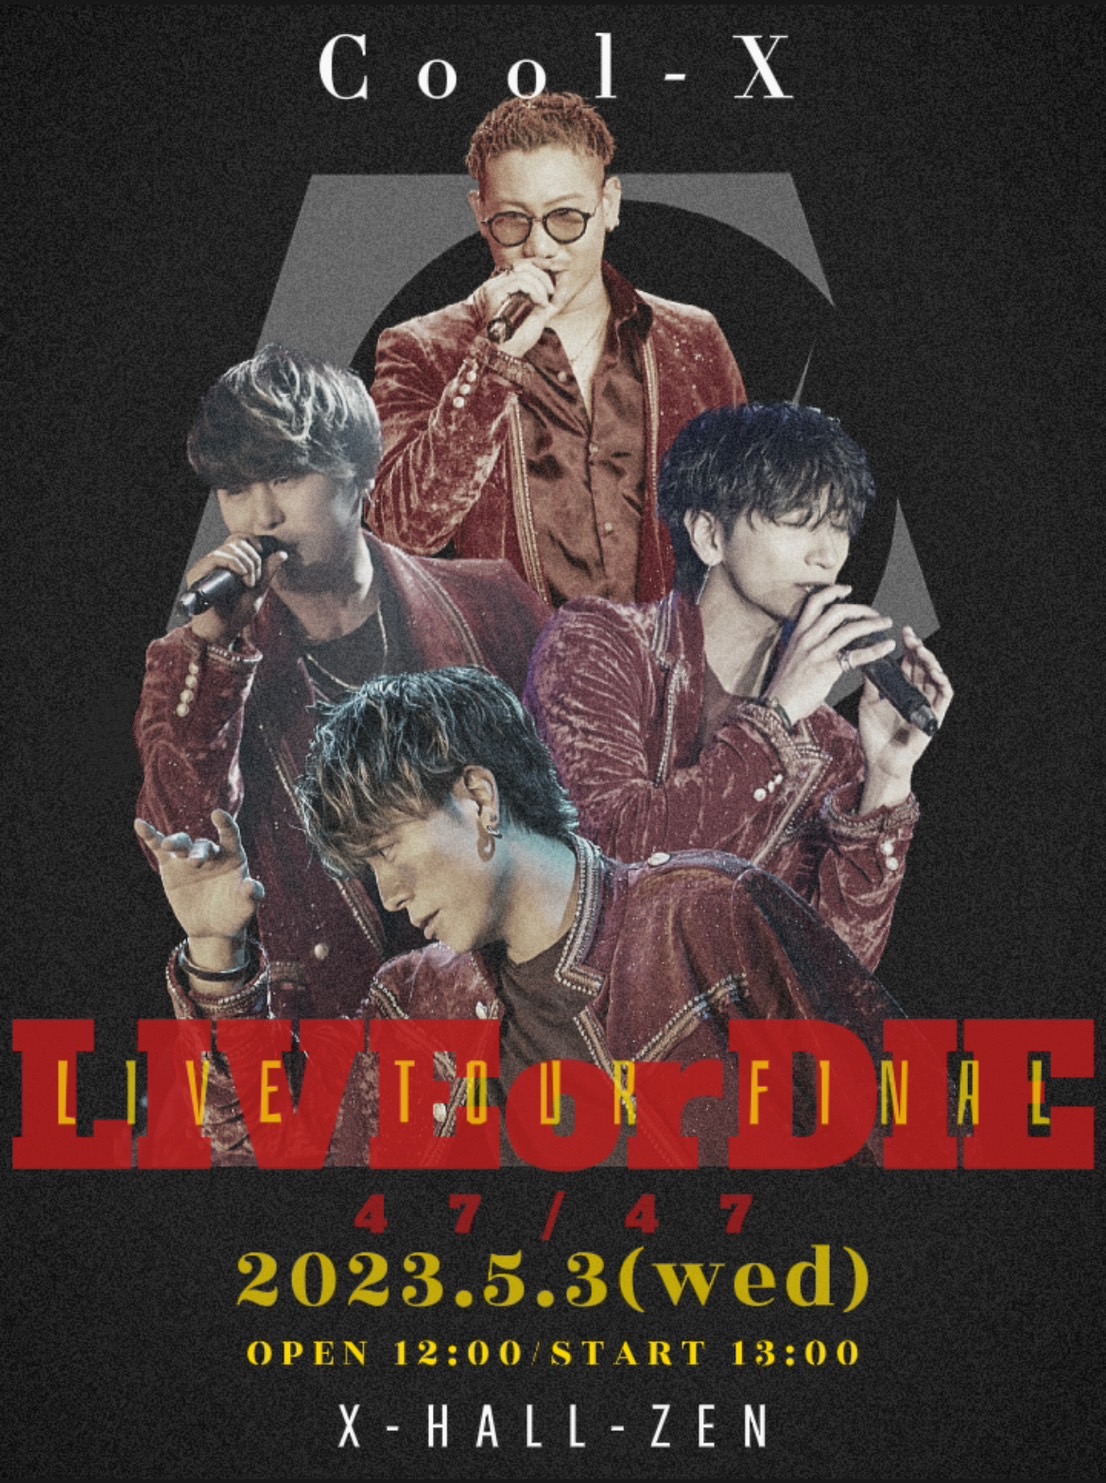 Cool-X LIVE TOUR FINAL -Live or Die- 47/47